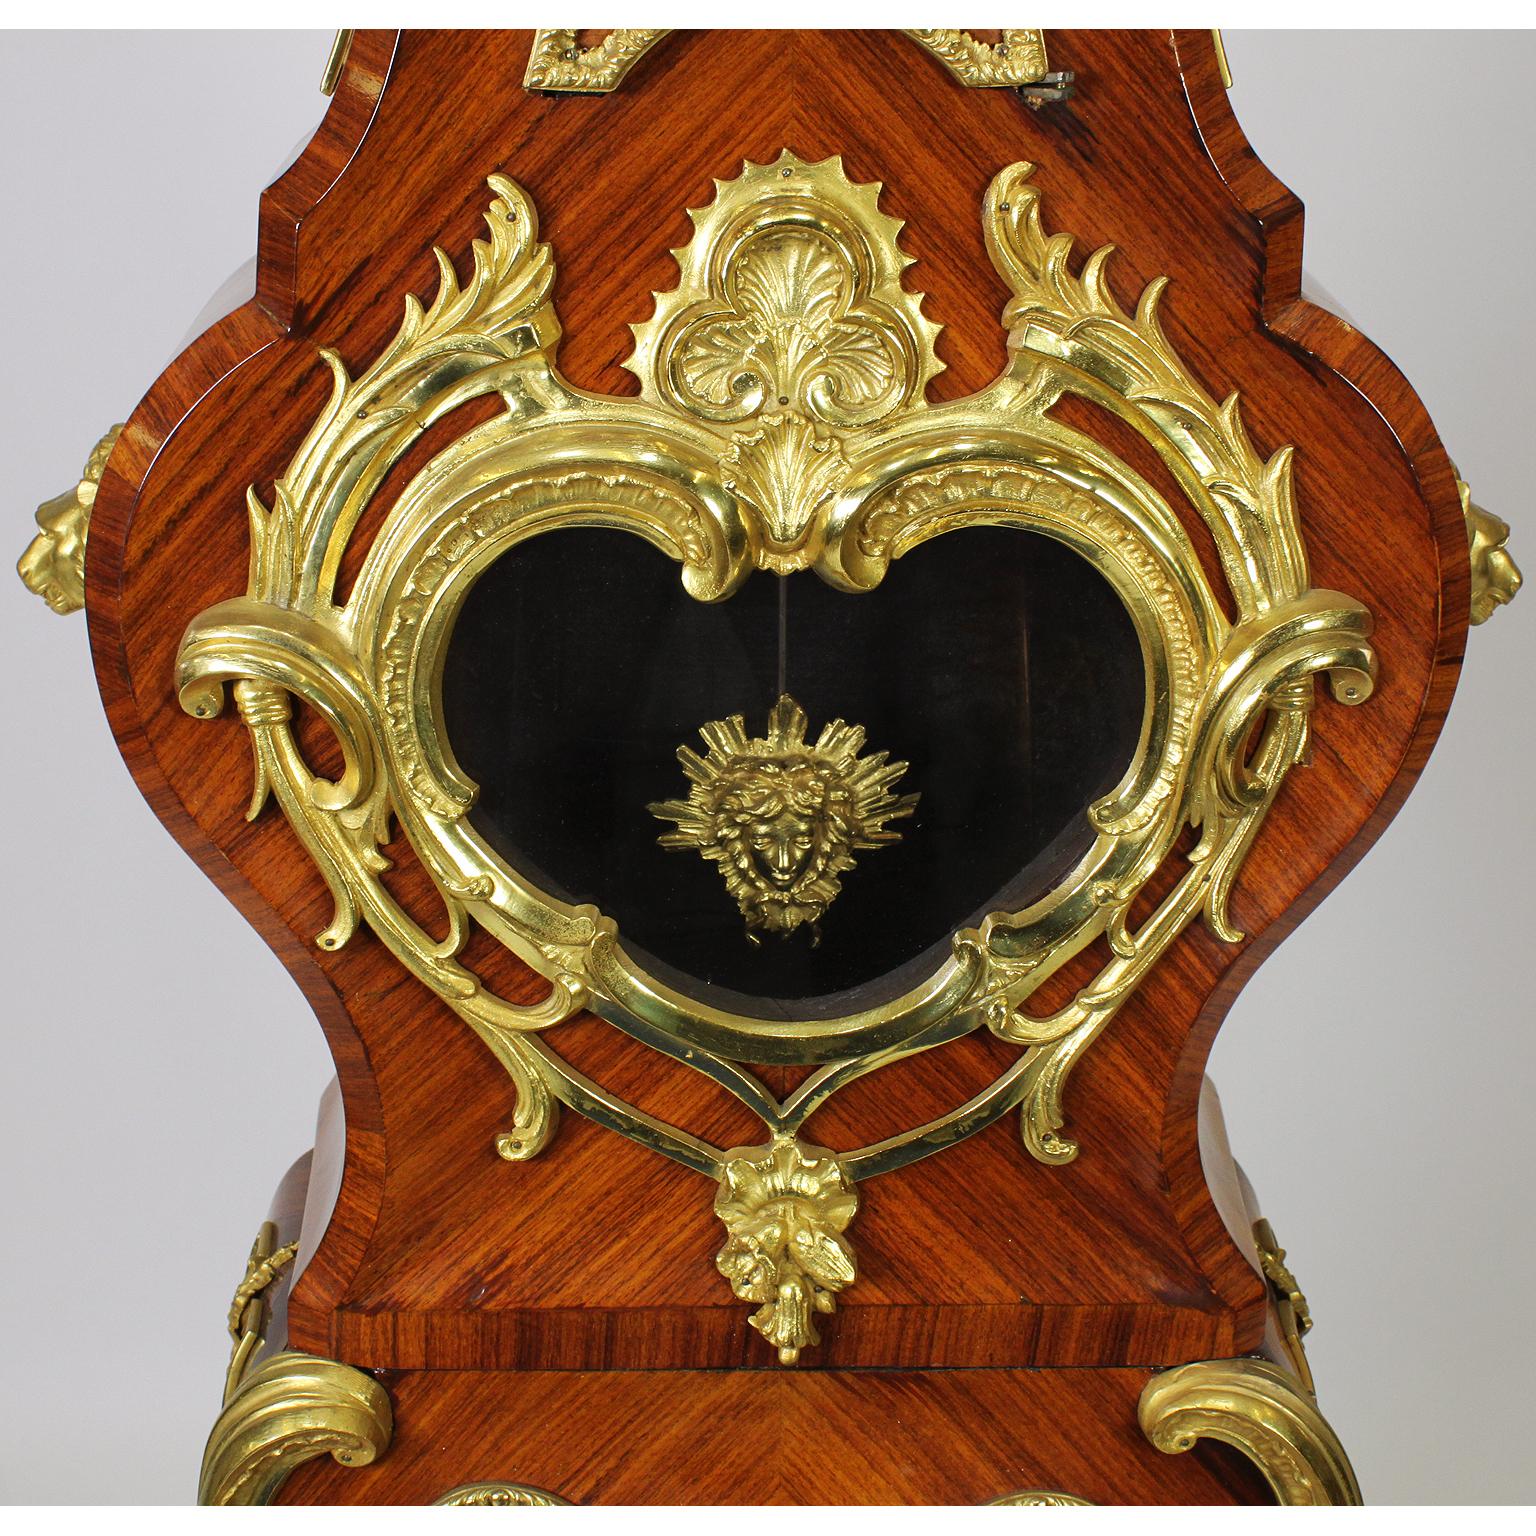 French 19th-20th Century Régence Style Gilt-Bronze Mounted Longcase Clock For Sale 4